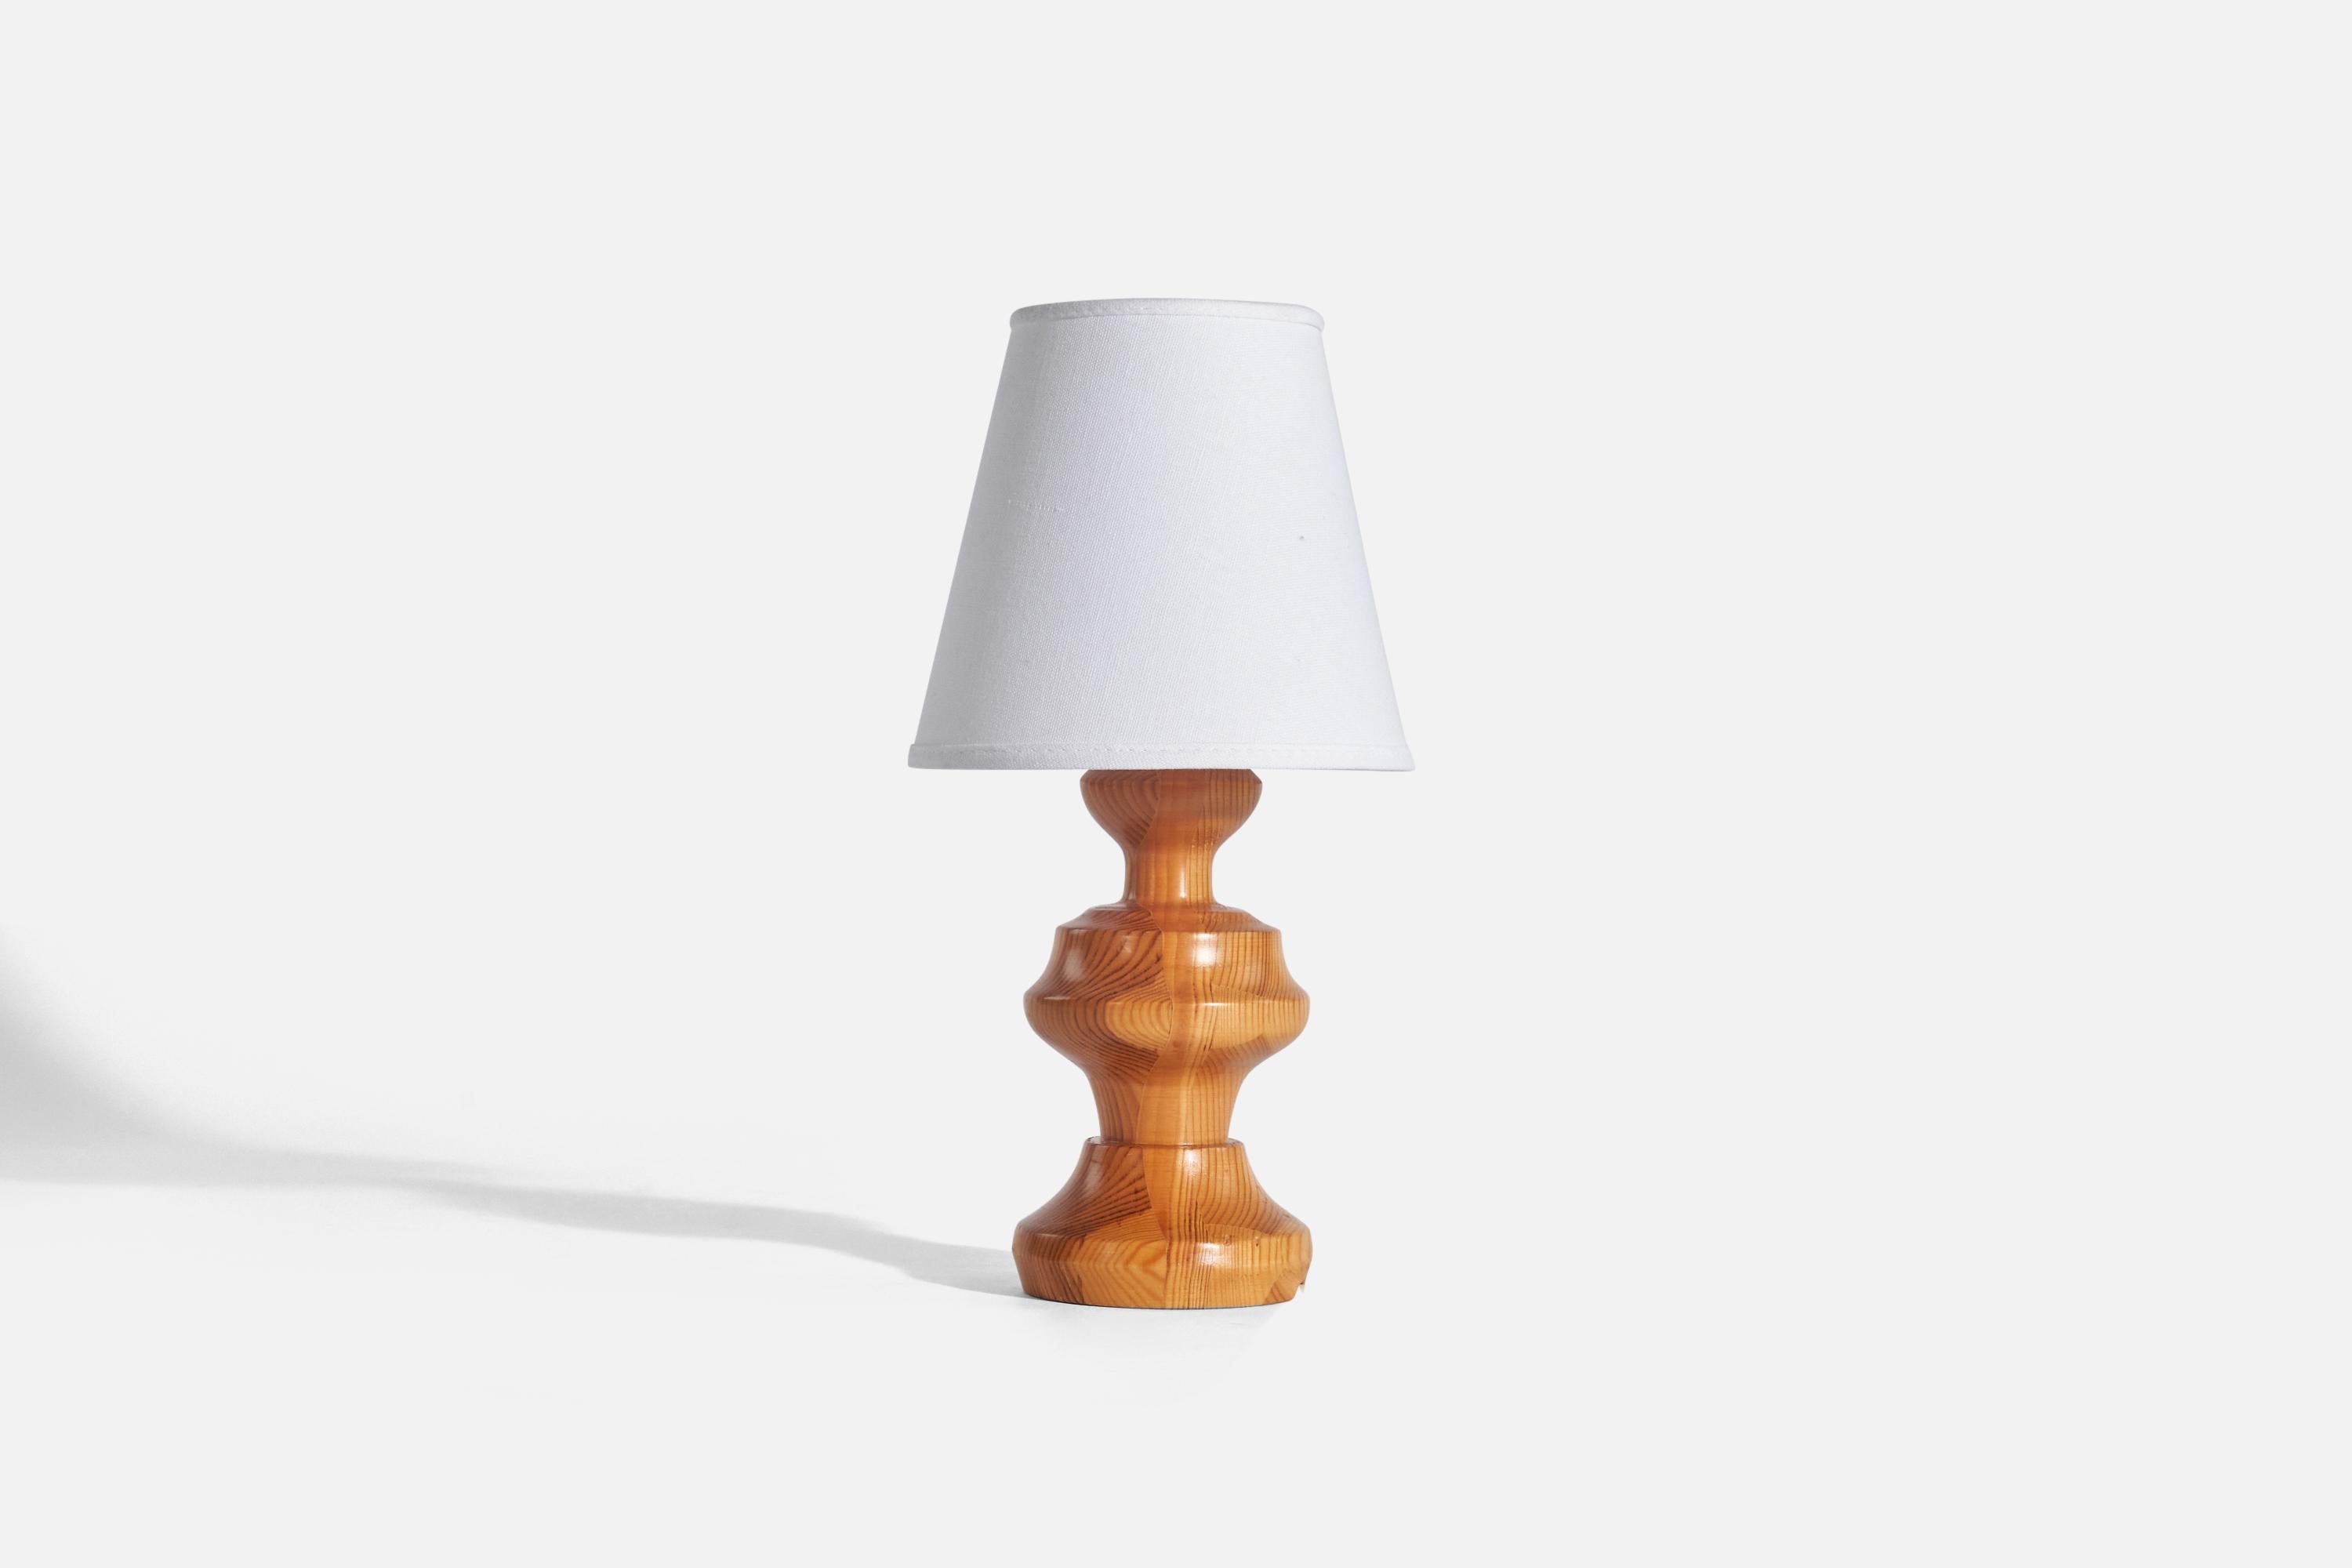 A pine table lamp designed and produced in Sweden, 1970s.

Sold without Lampshade(s)
Dimensions of Lamp (inches) : 9.56 x 4.10 x 4.10 (Height x Width x Depth)
Dimensions of Shade (inches) : 4 x 6.87 x 6.31 (Top Diameter x Bottom Diameter x